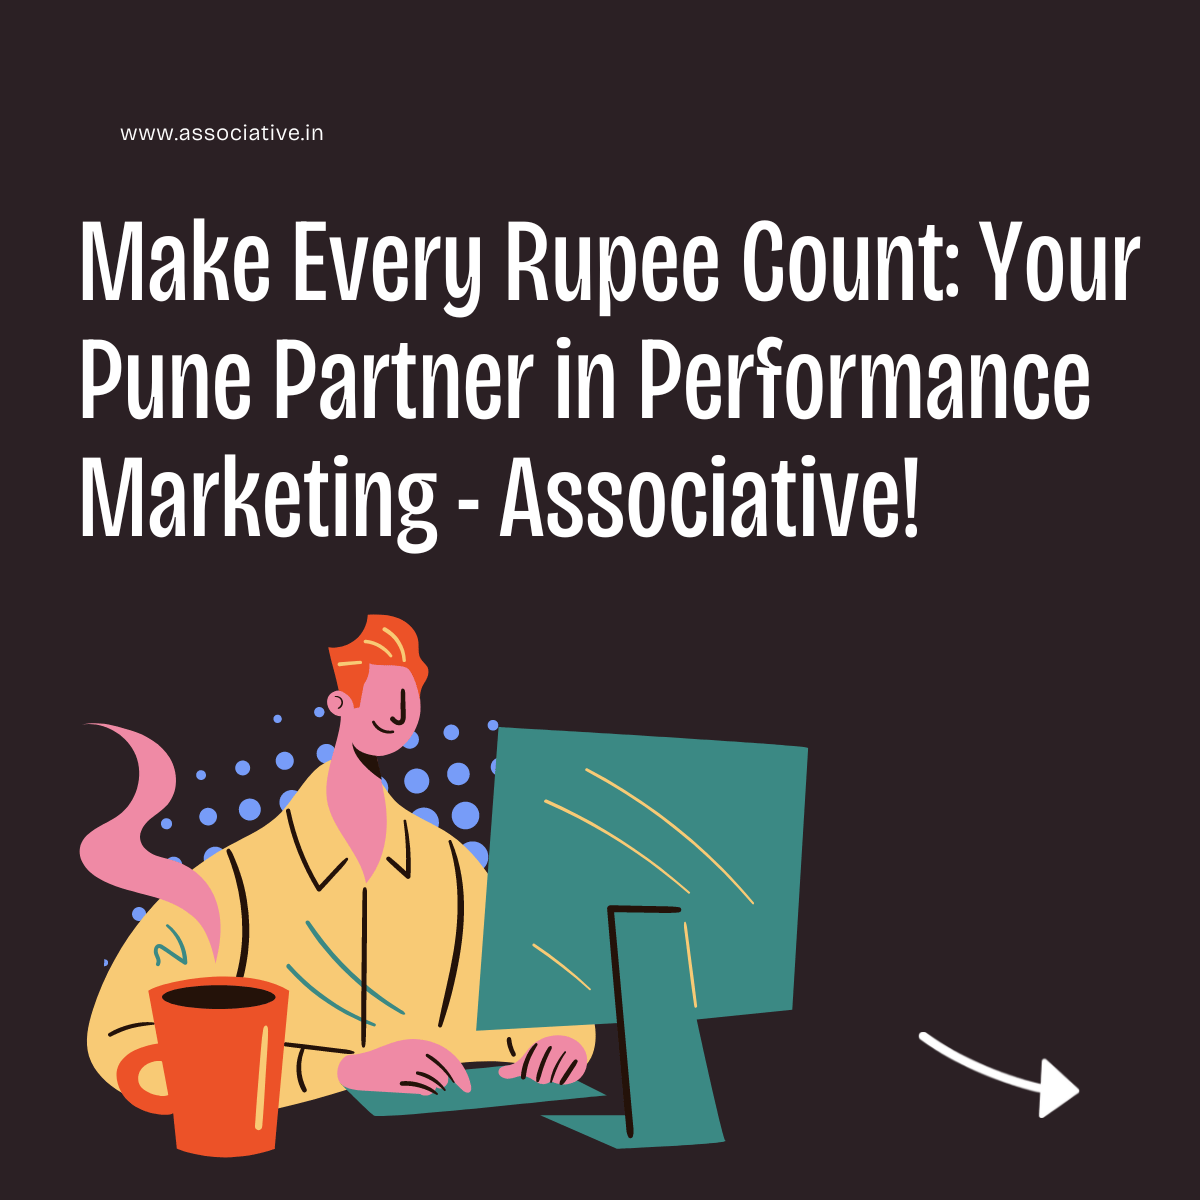 Make Every Rupee Count: Your Pune Partner in Performance Marketing - Associative!